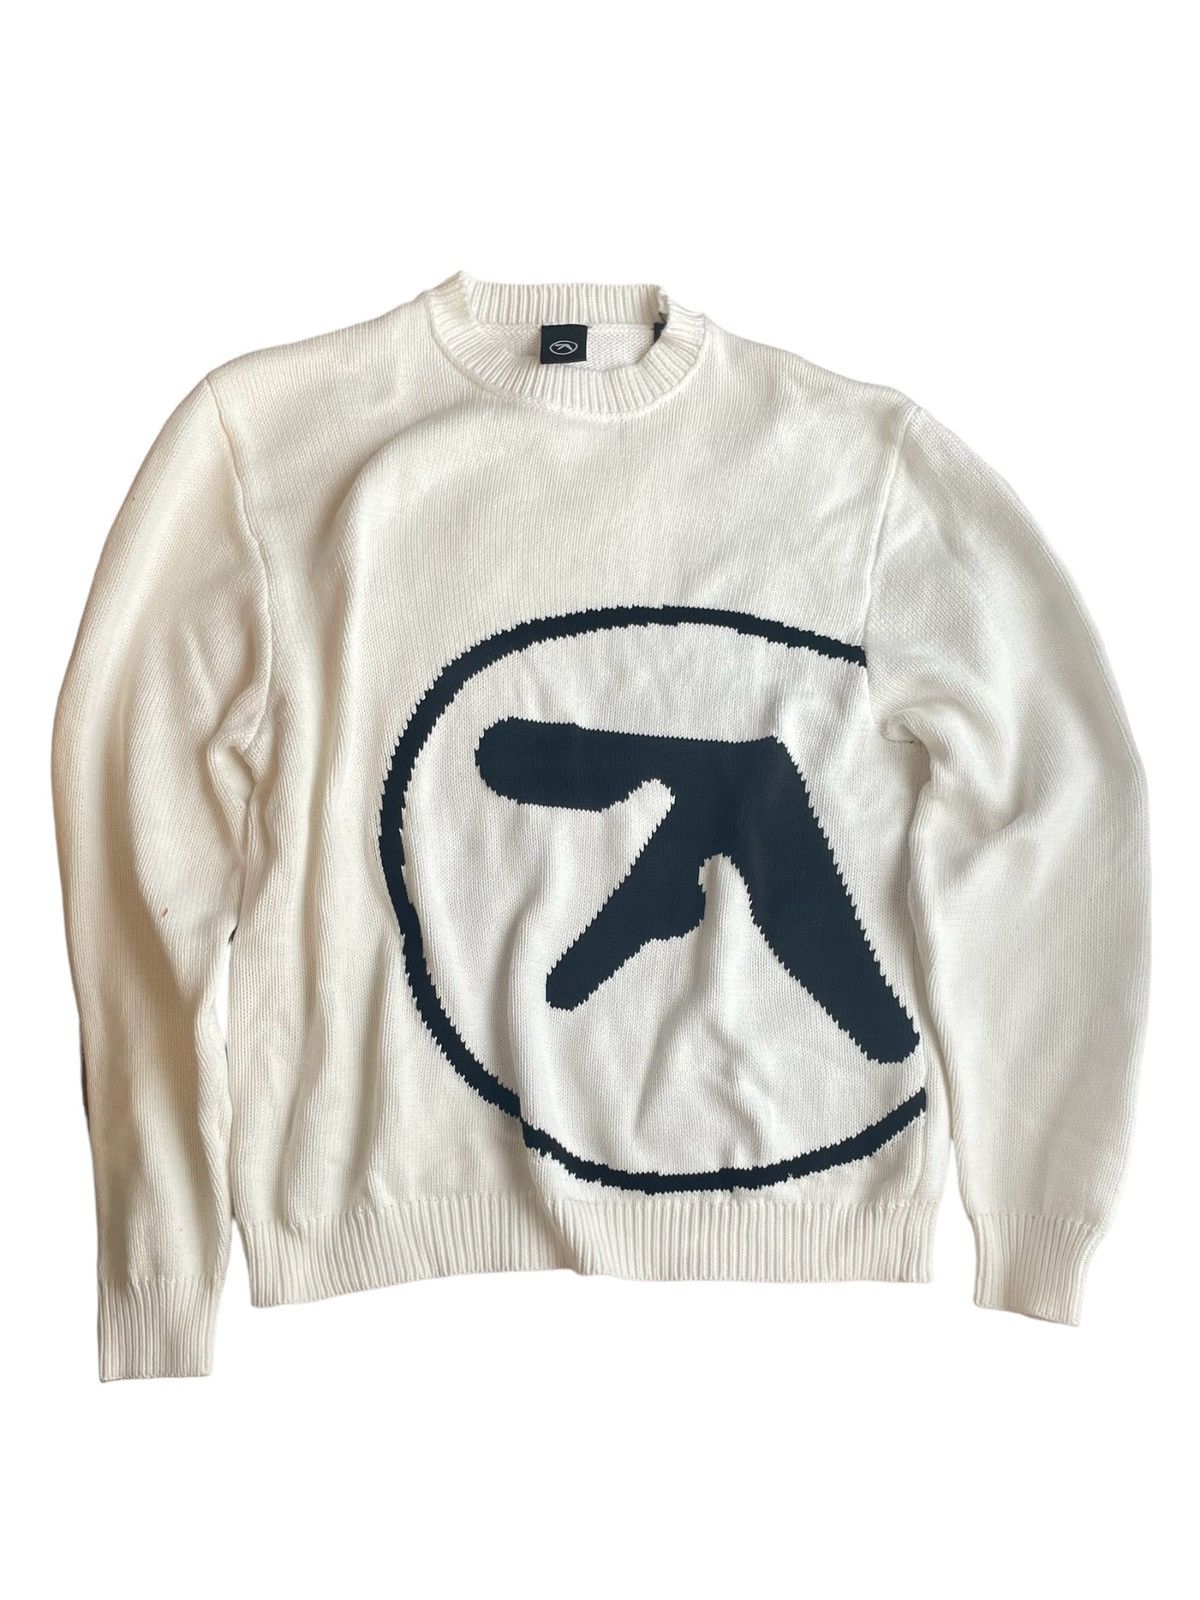 Japanese Brand Aphex twin knit sweater | Grailed